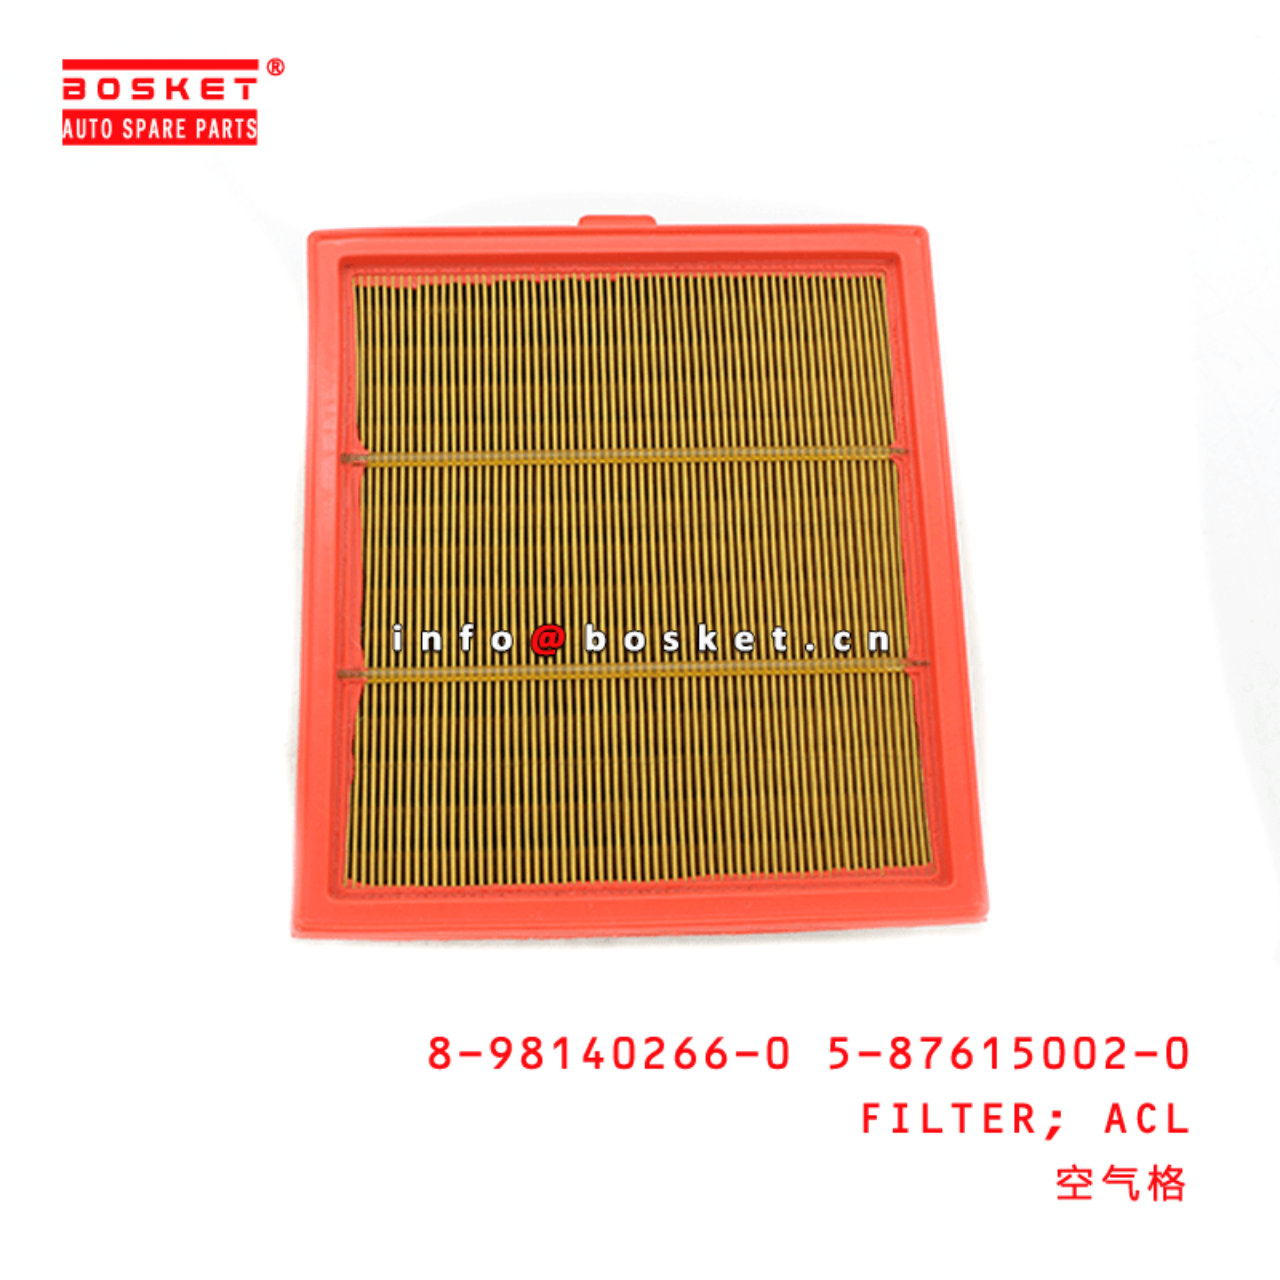 8-98140266-0 5-87615002-0 Air Cleaner Filter 8981402660 5876150020 Suitable for ISUZU D-MAX